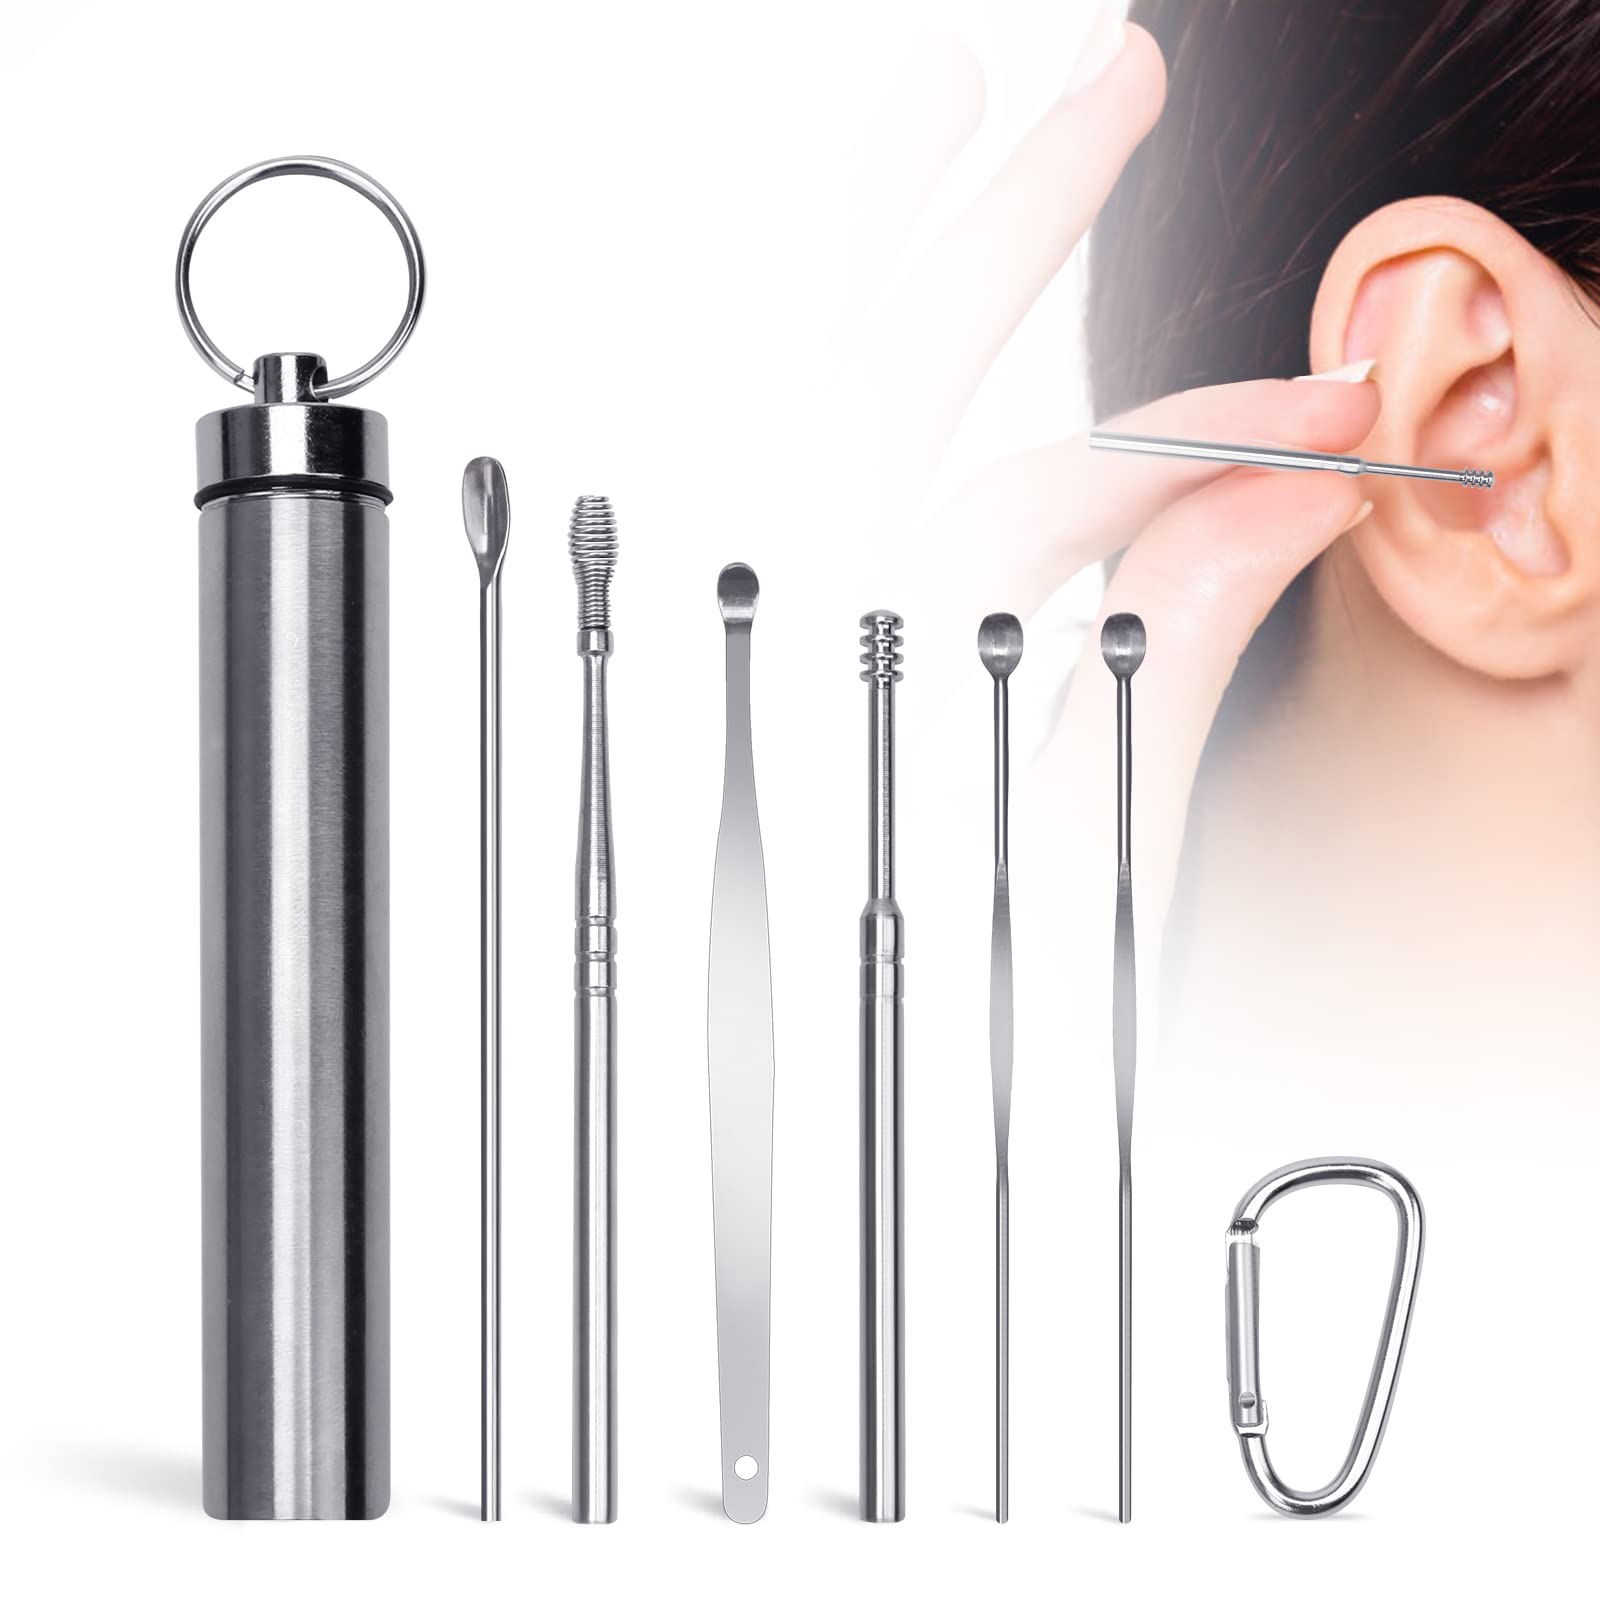 Stainless Steel Ear Wax Removal Kit With Storage Box, Ear Cleaning